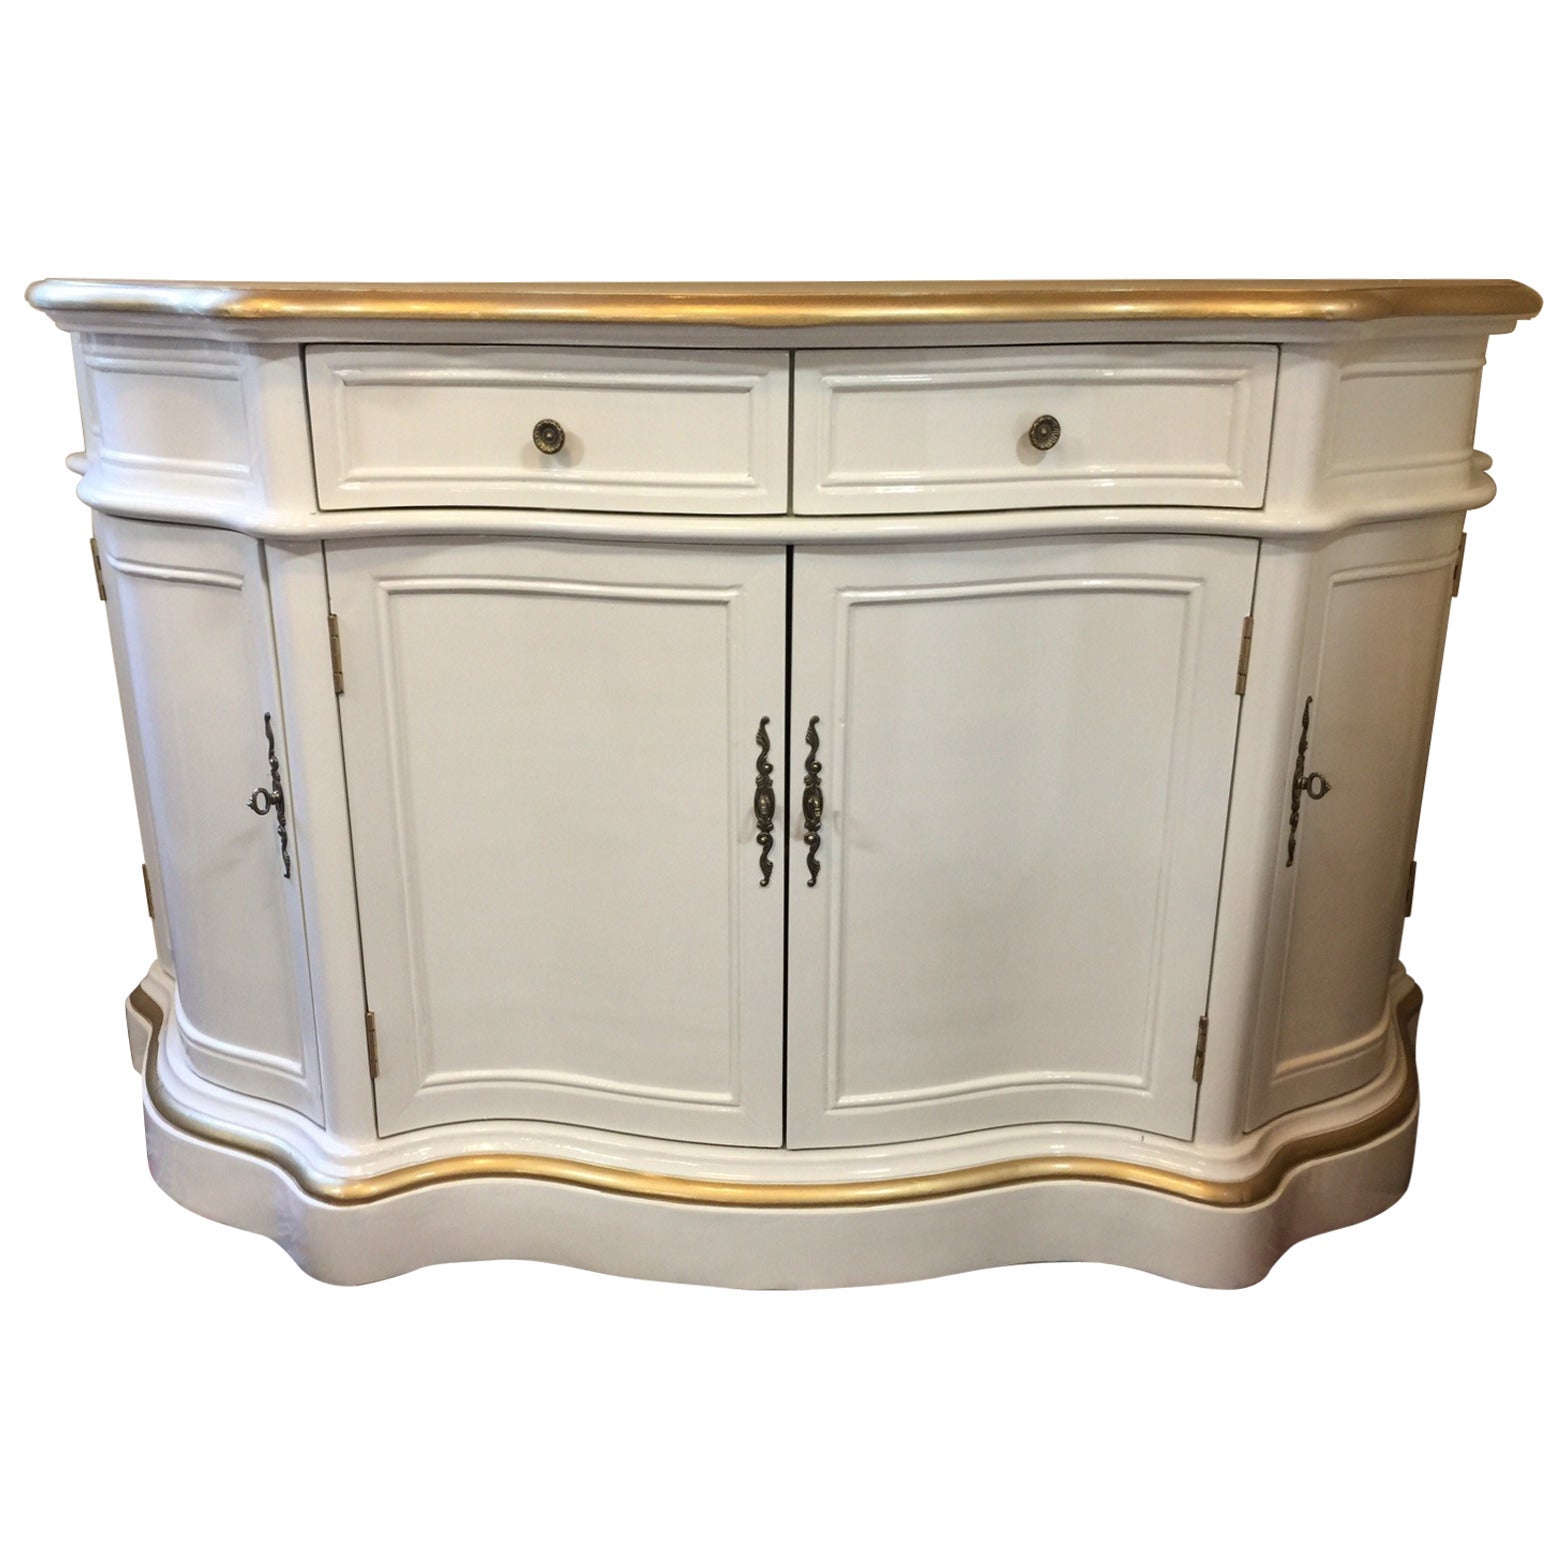 Curvy Lacquered Sideboard in Cream and Gold